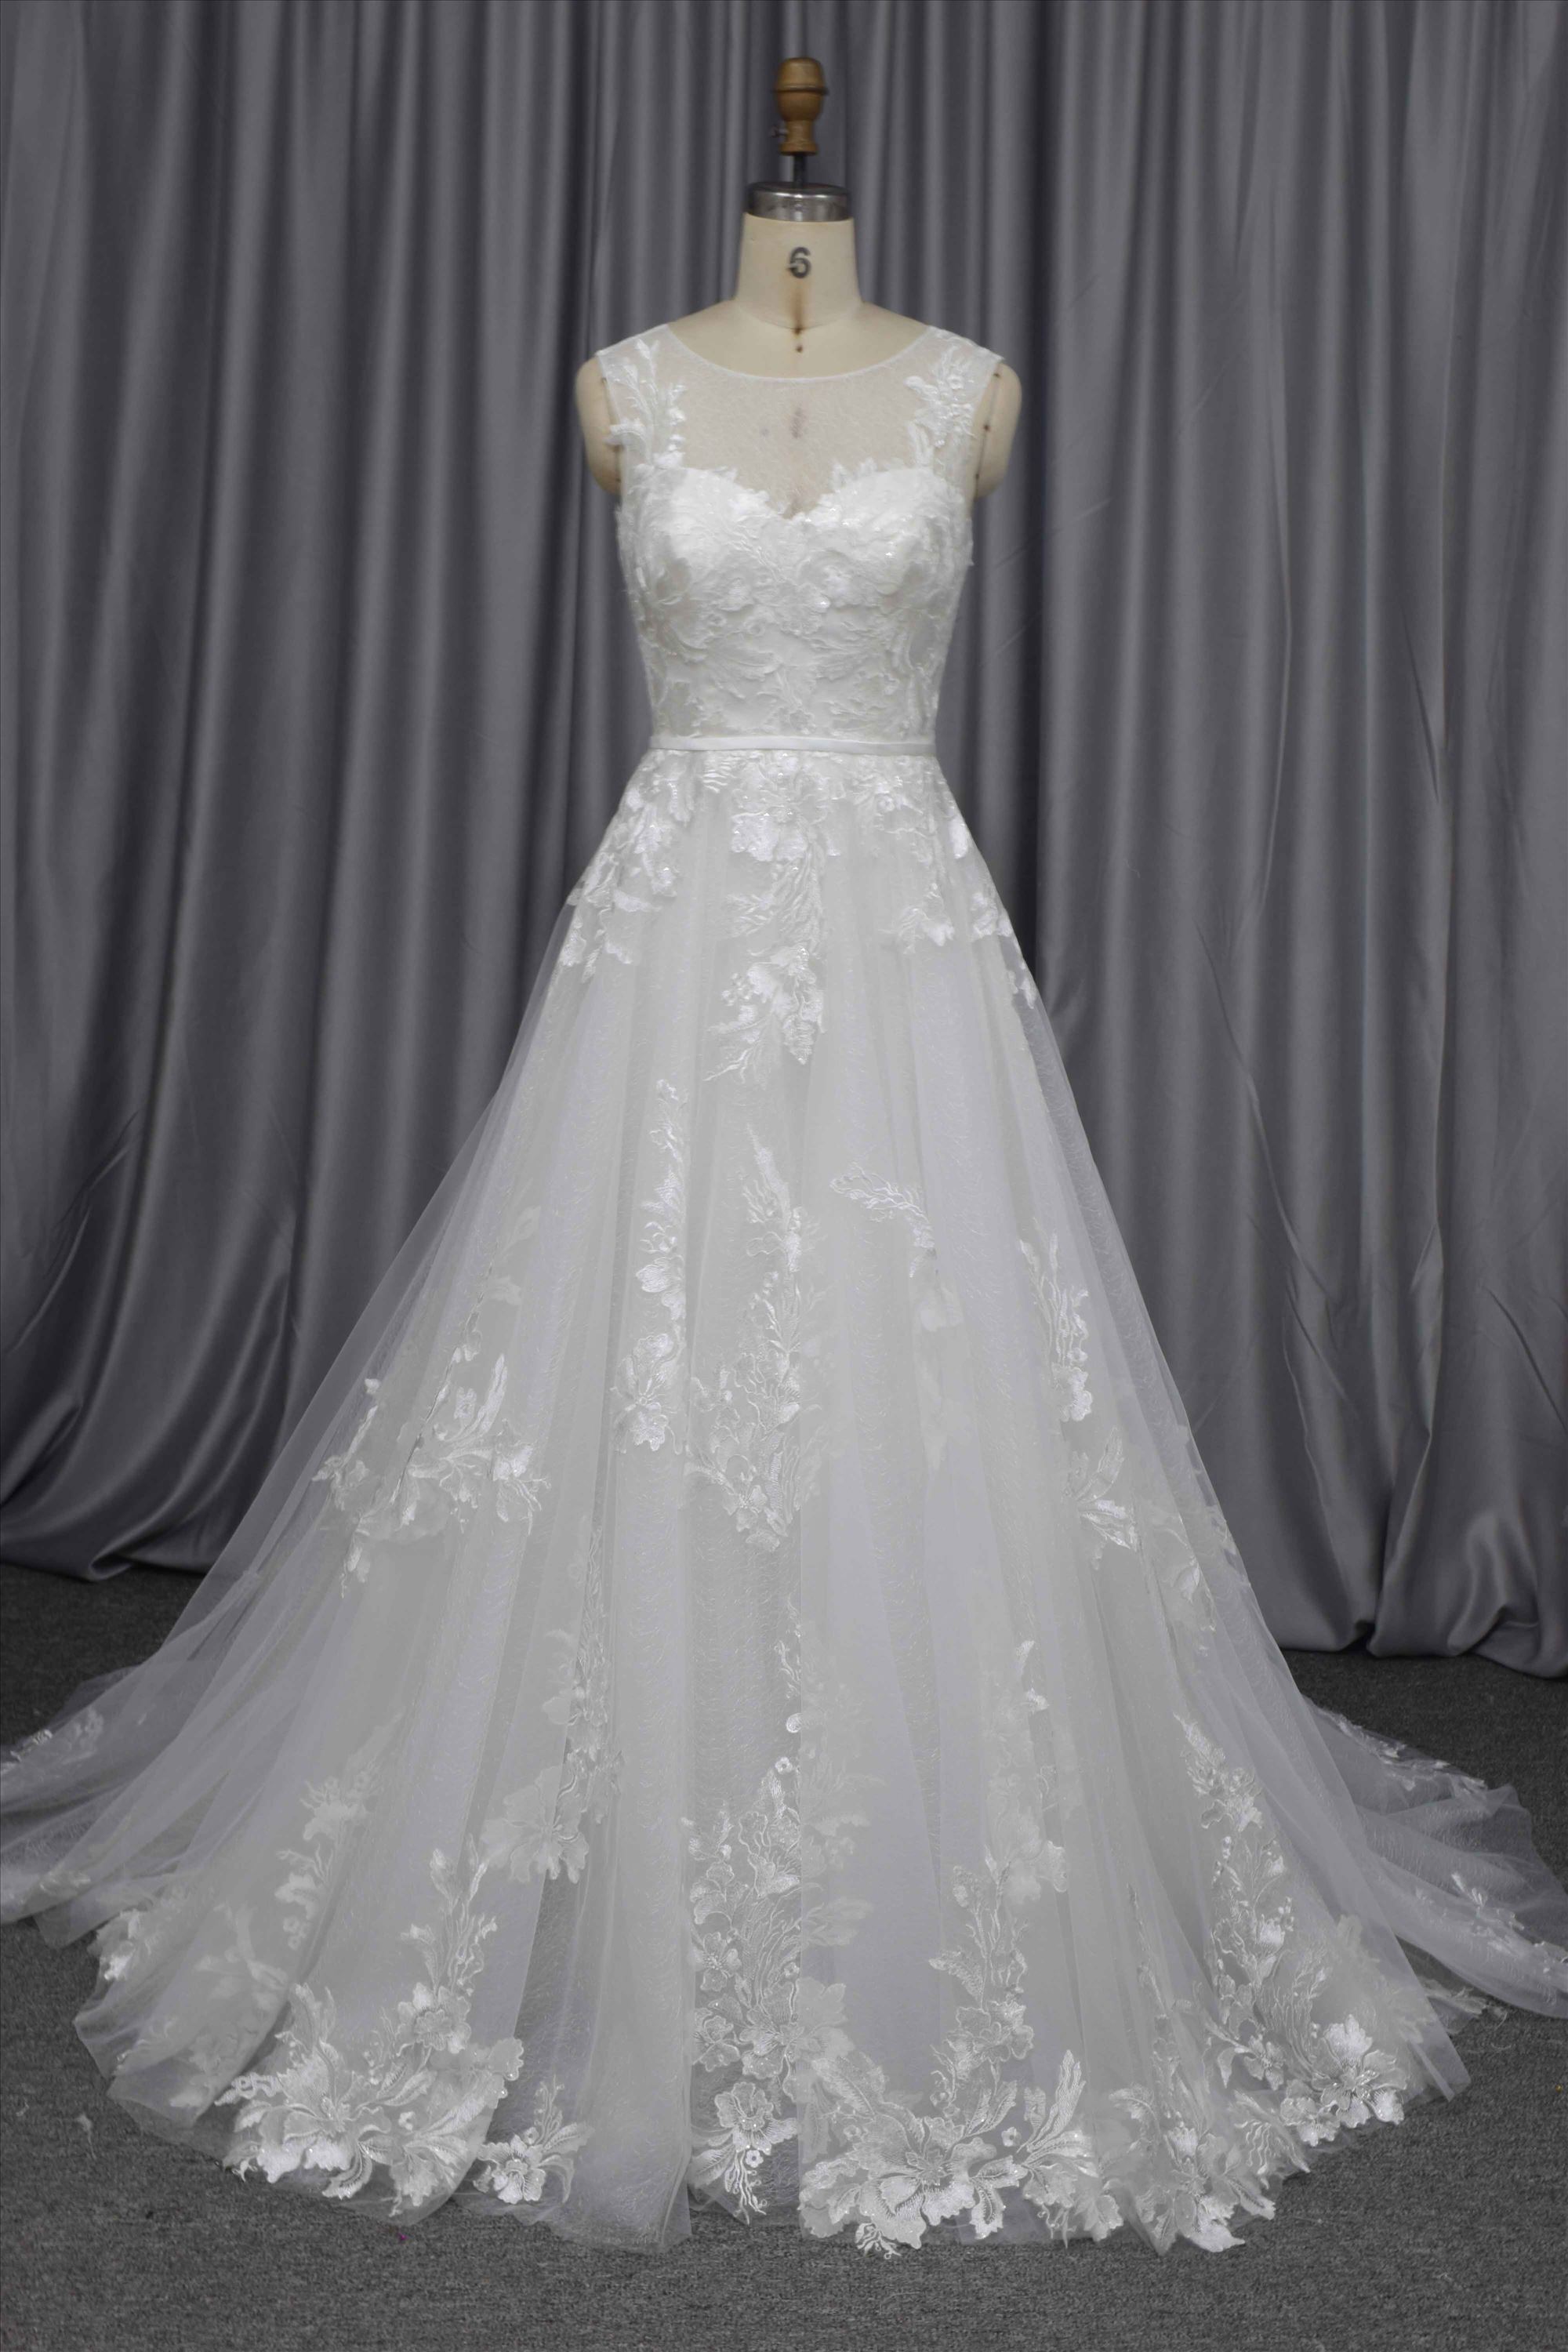 A line wedding dress new design in stock